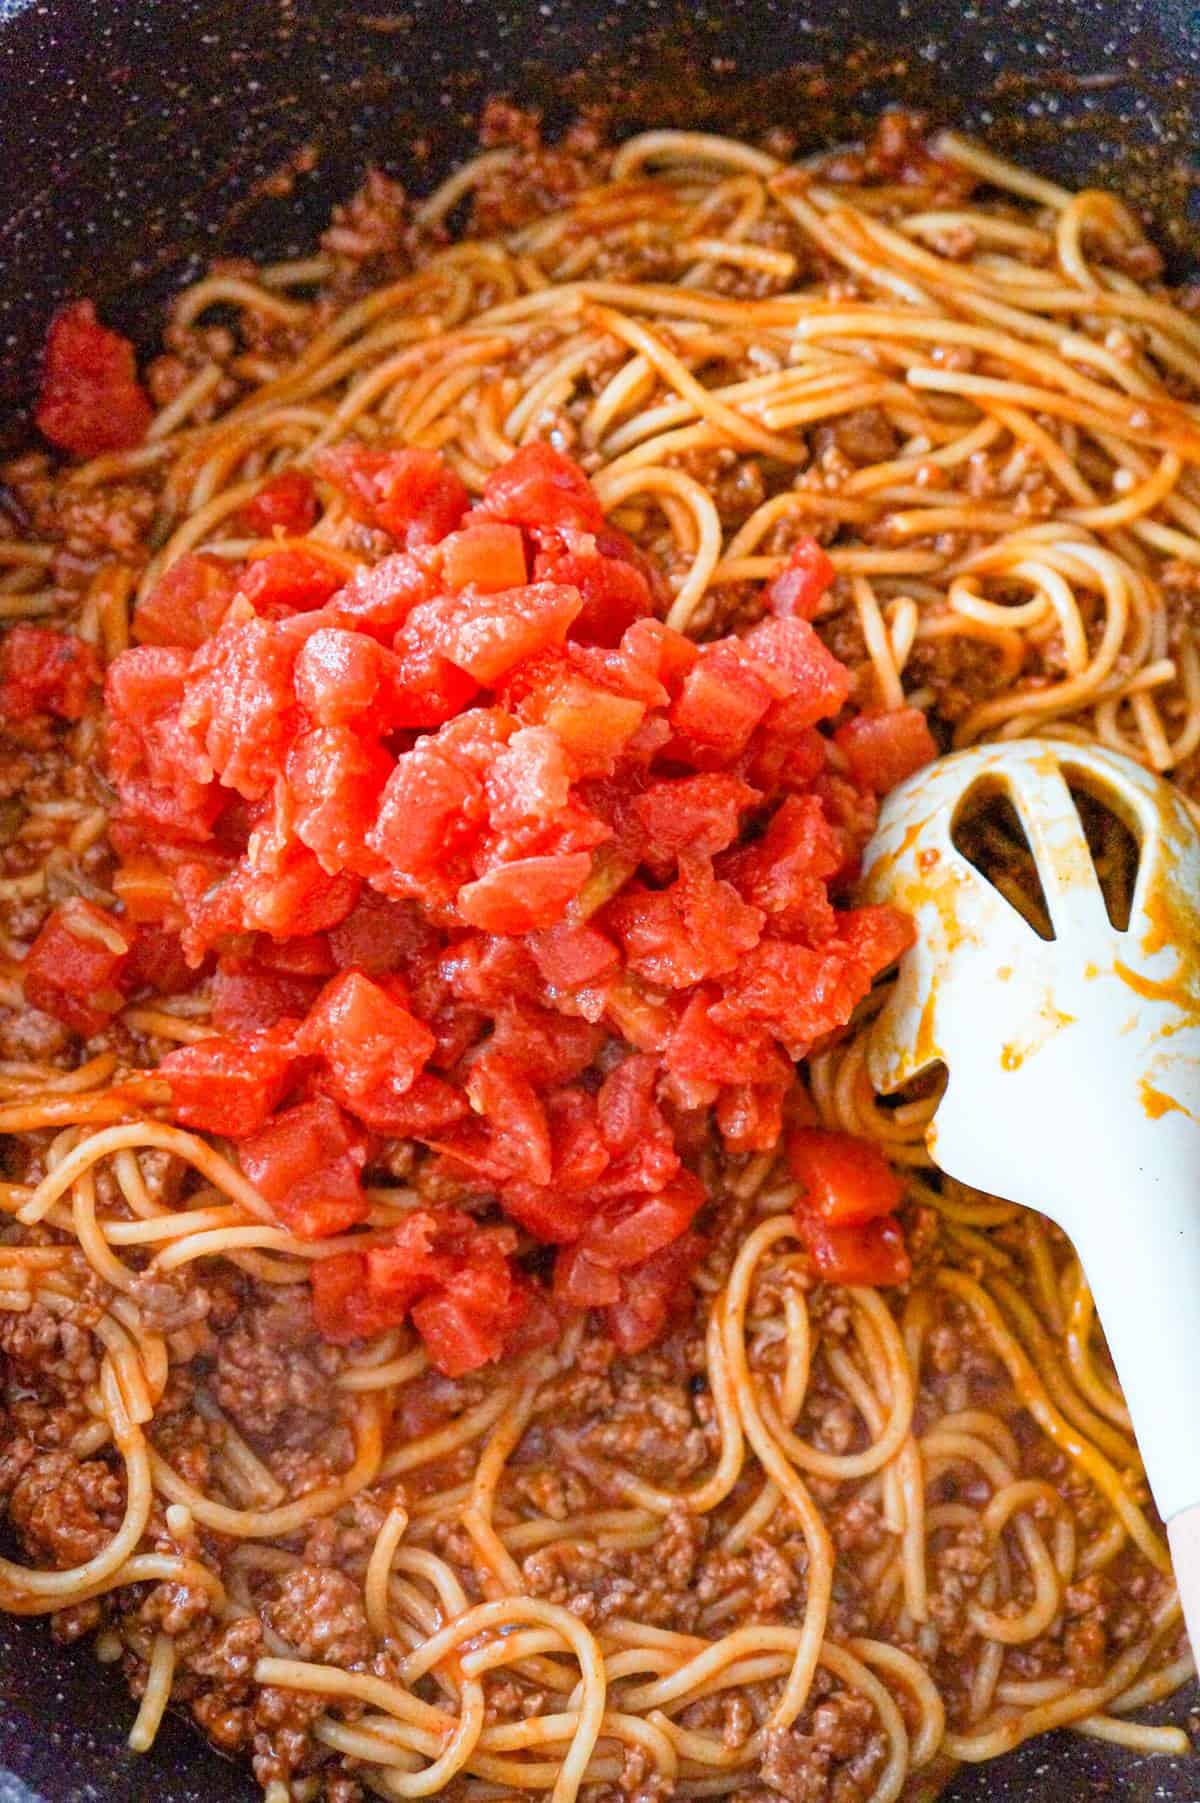 Rotel on top of spaghetti in a saute pan